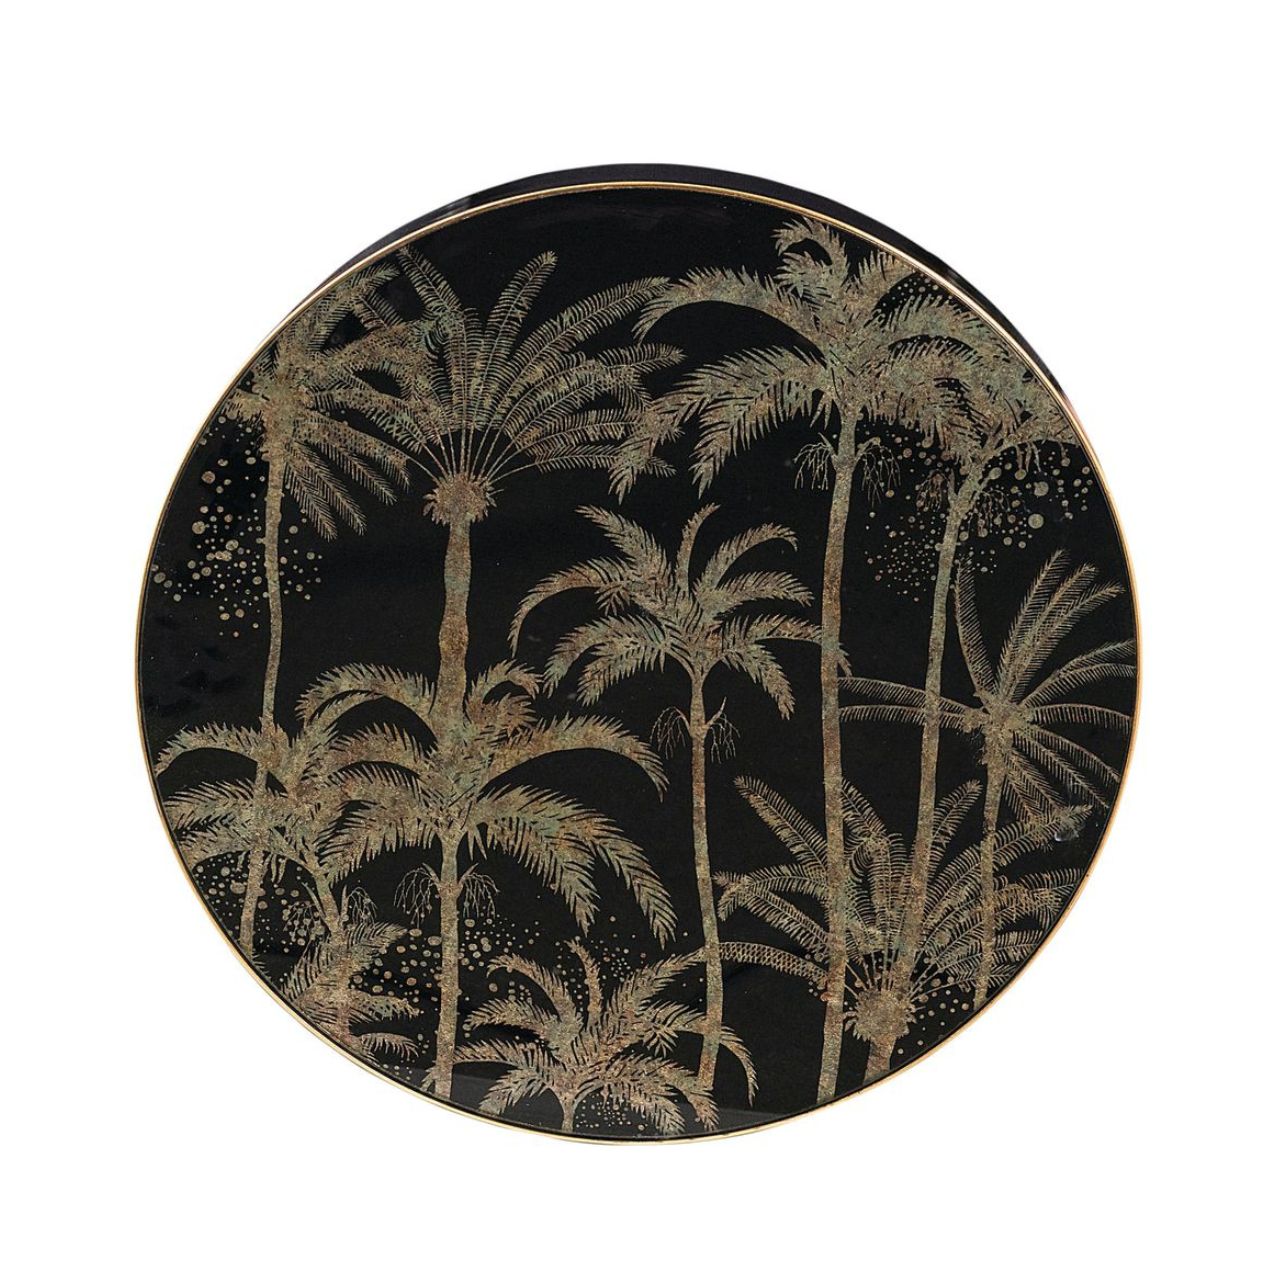 Palm Tree Side Table by Mindy Brownes Interiors  Black painted surround and leg with gold tip, 45cm diameter side table with black & antiqued gold palm tree pattern top with acrylic overlay. Can be styled solo or as part of a collaboration with the Venus, Bellatrix & Vega side tables for the ultimate styling effect.